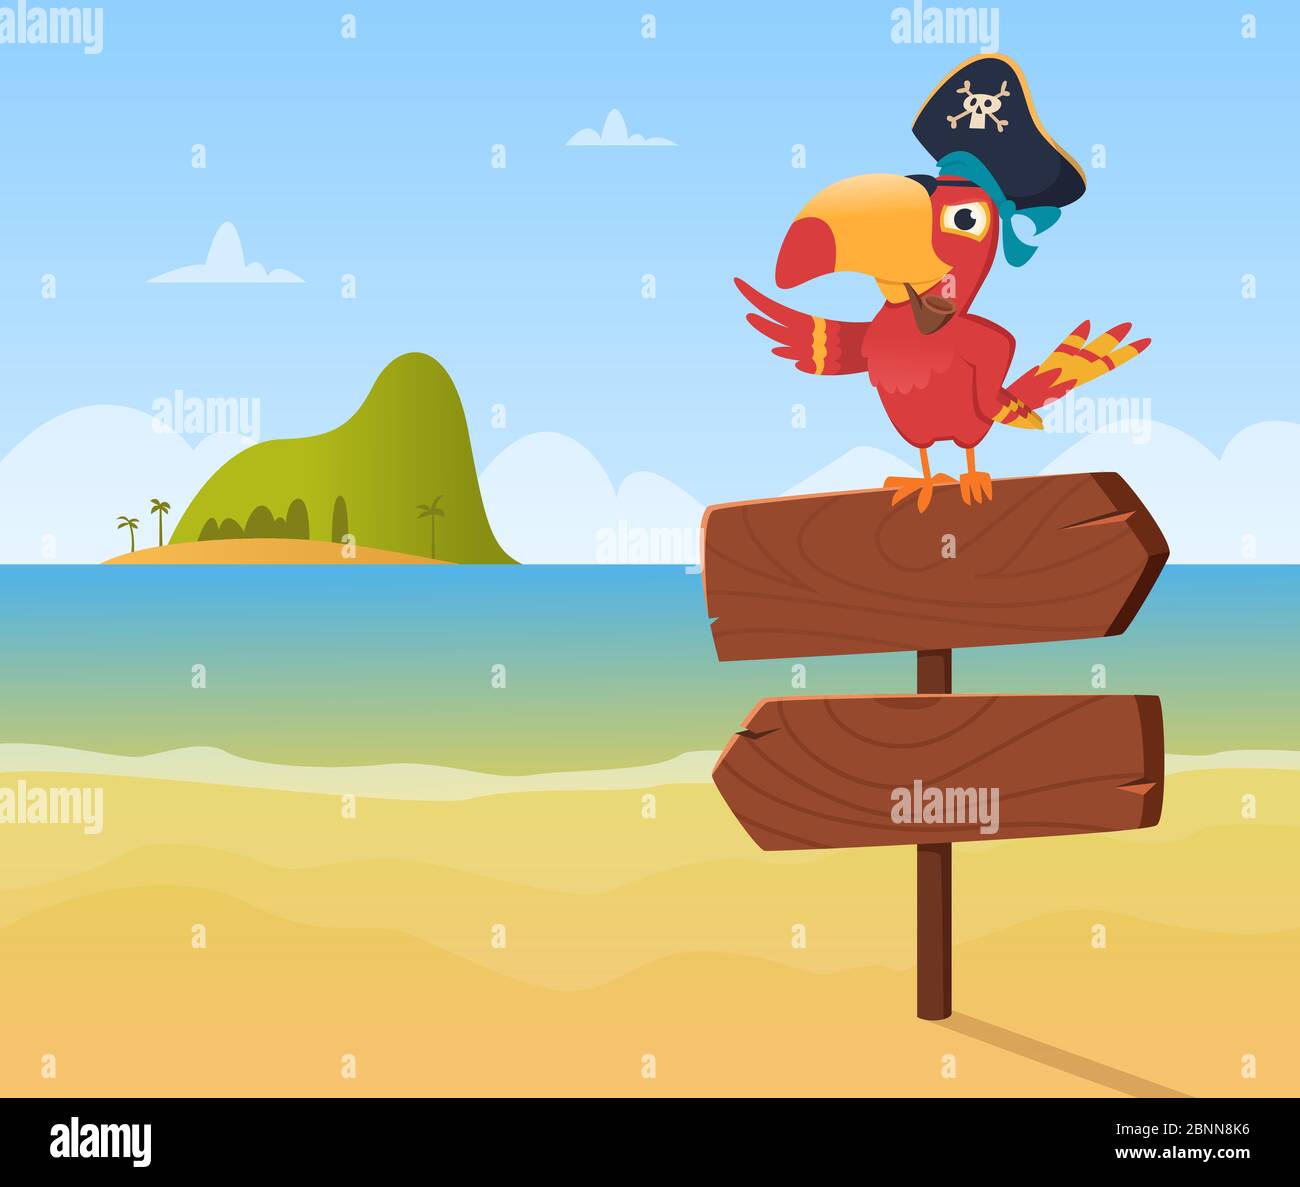 Pirate parrot. Funny colored bird arara sitting on wood sign direction vector background illustration in cartoon style Stock Vector